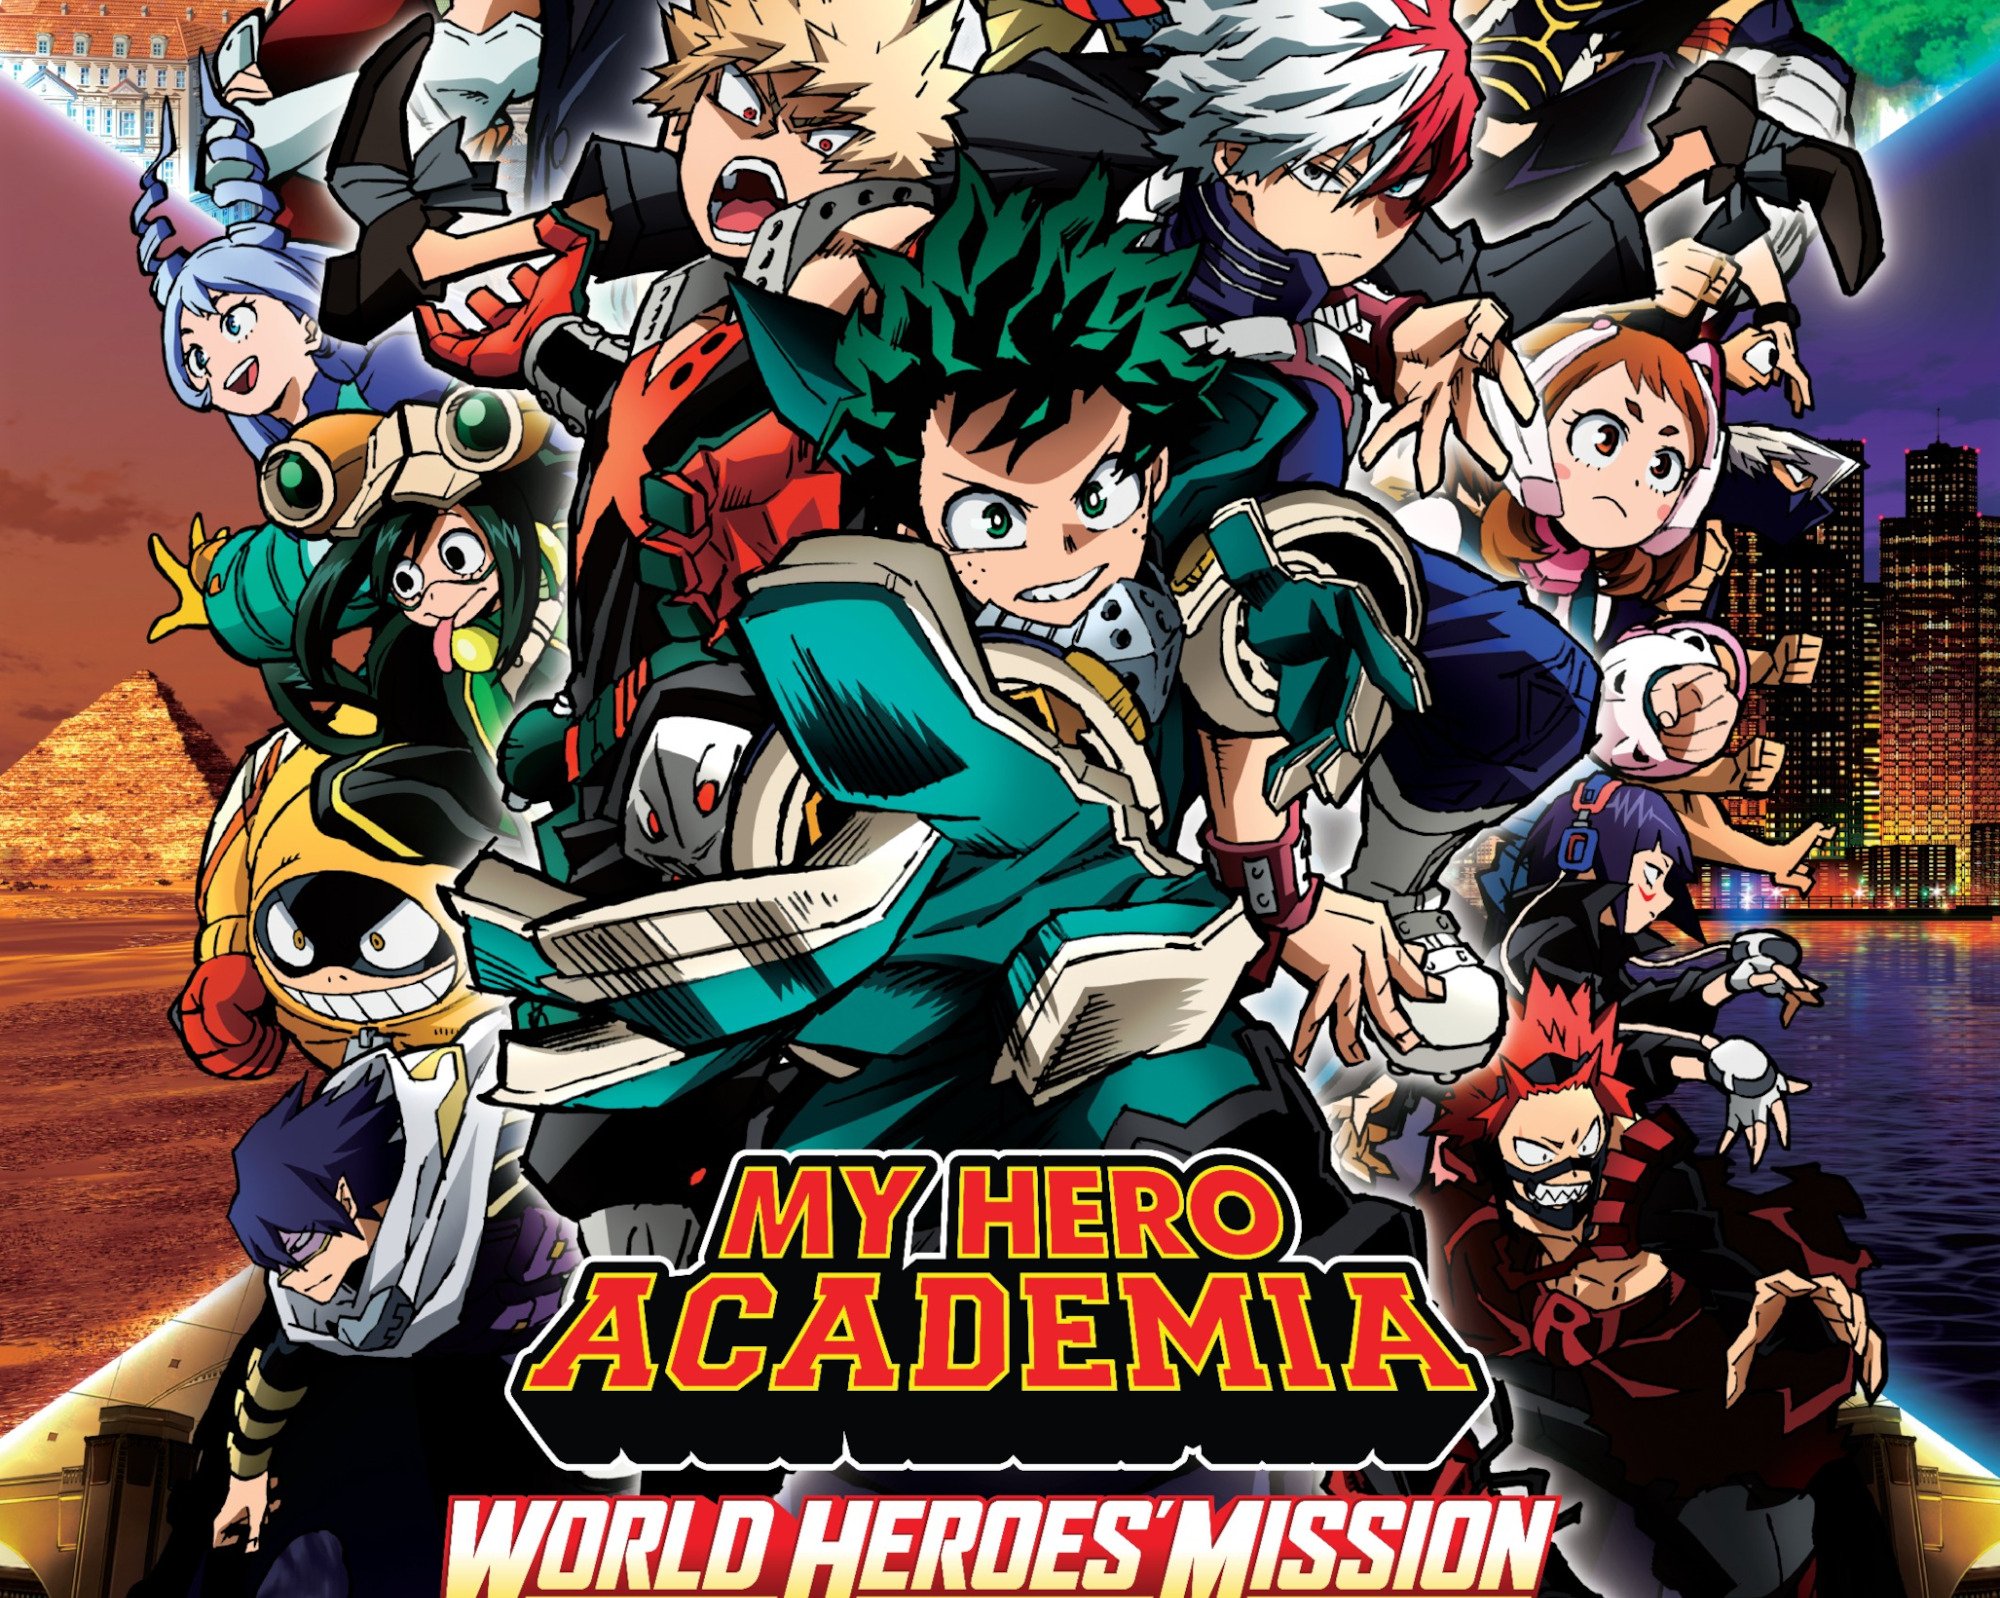 The movie poster for 'My Hero Academia: World Heroes' Mission.' It shows Deku and his classmates in the middle, with a pyramid on the left and a cityscape on the right.